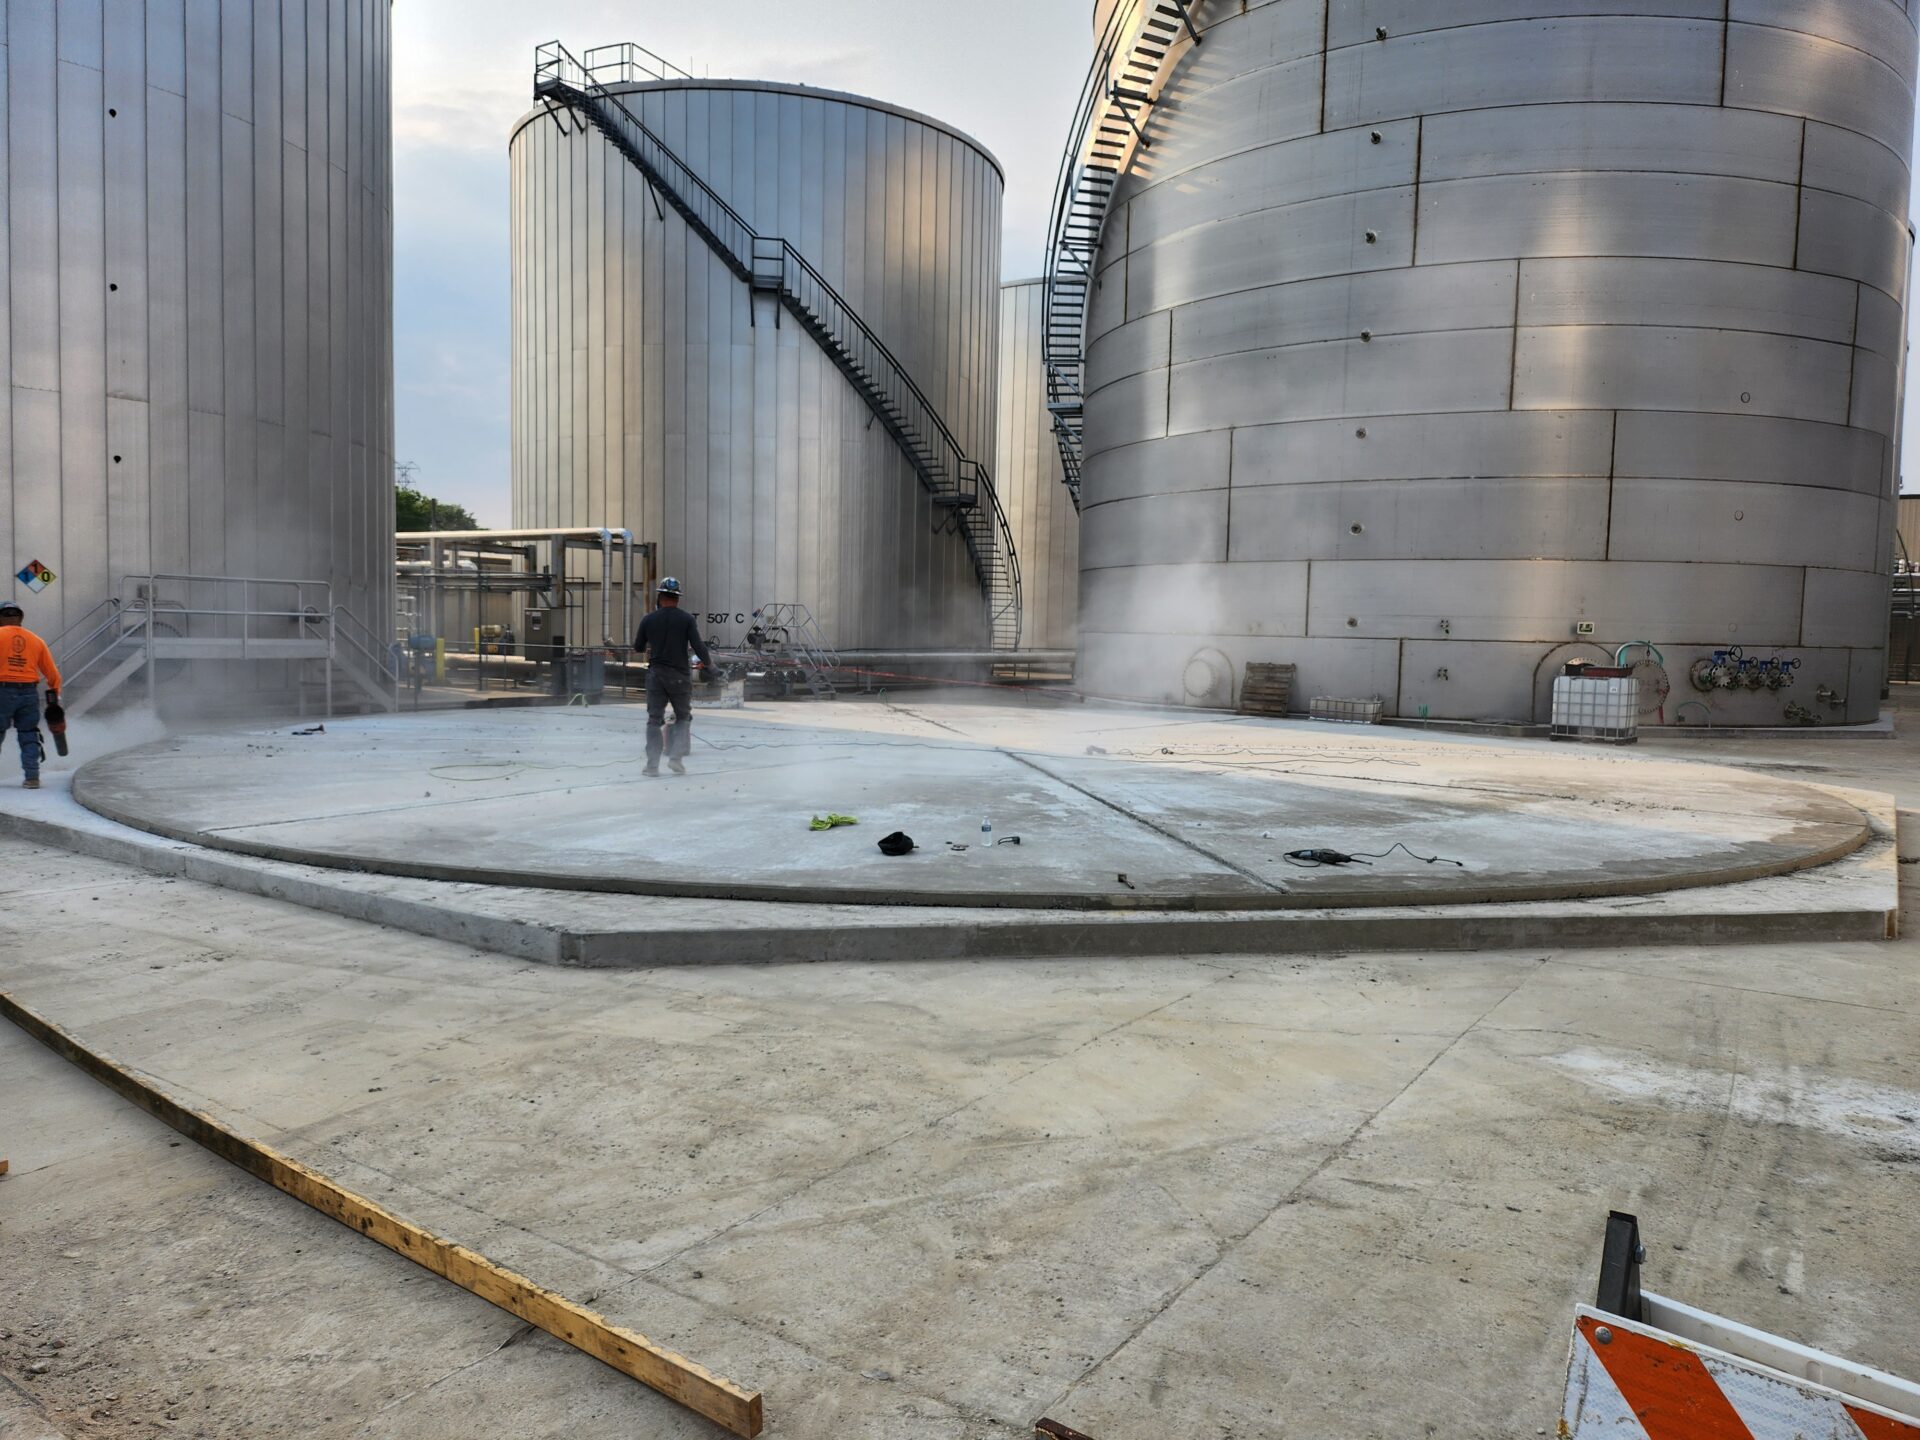 Workers cleaning concrete floor near industrial silos.